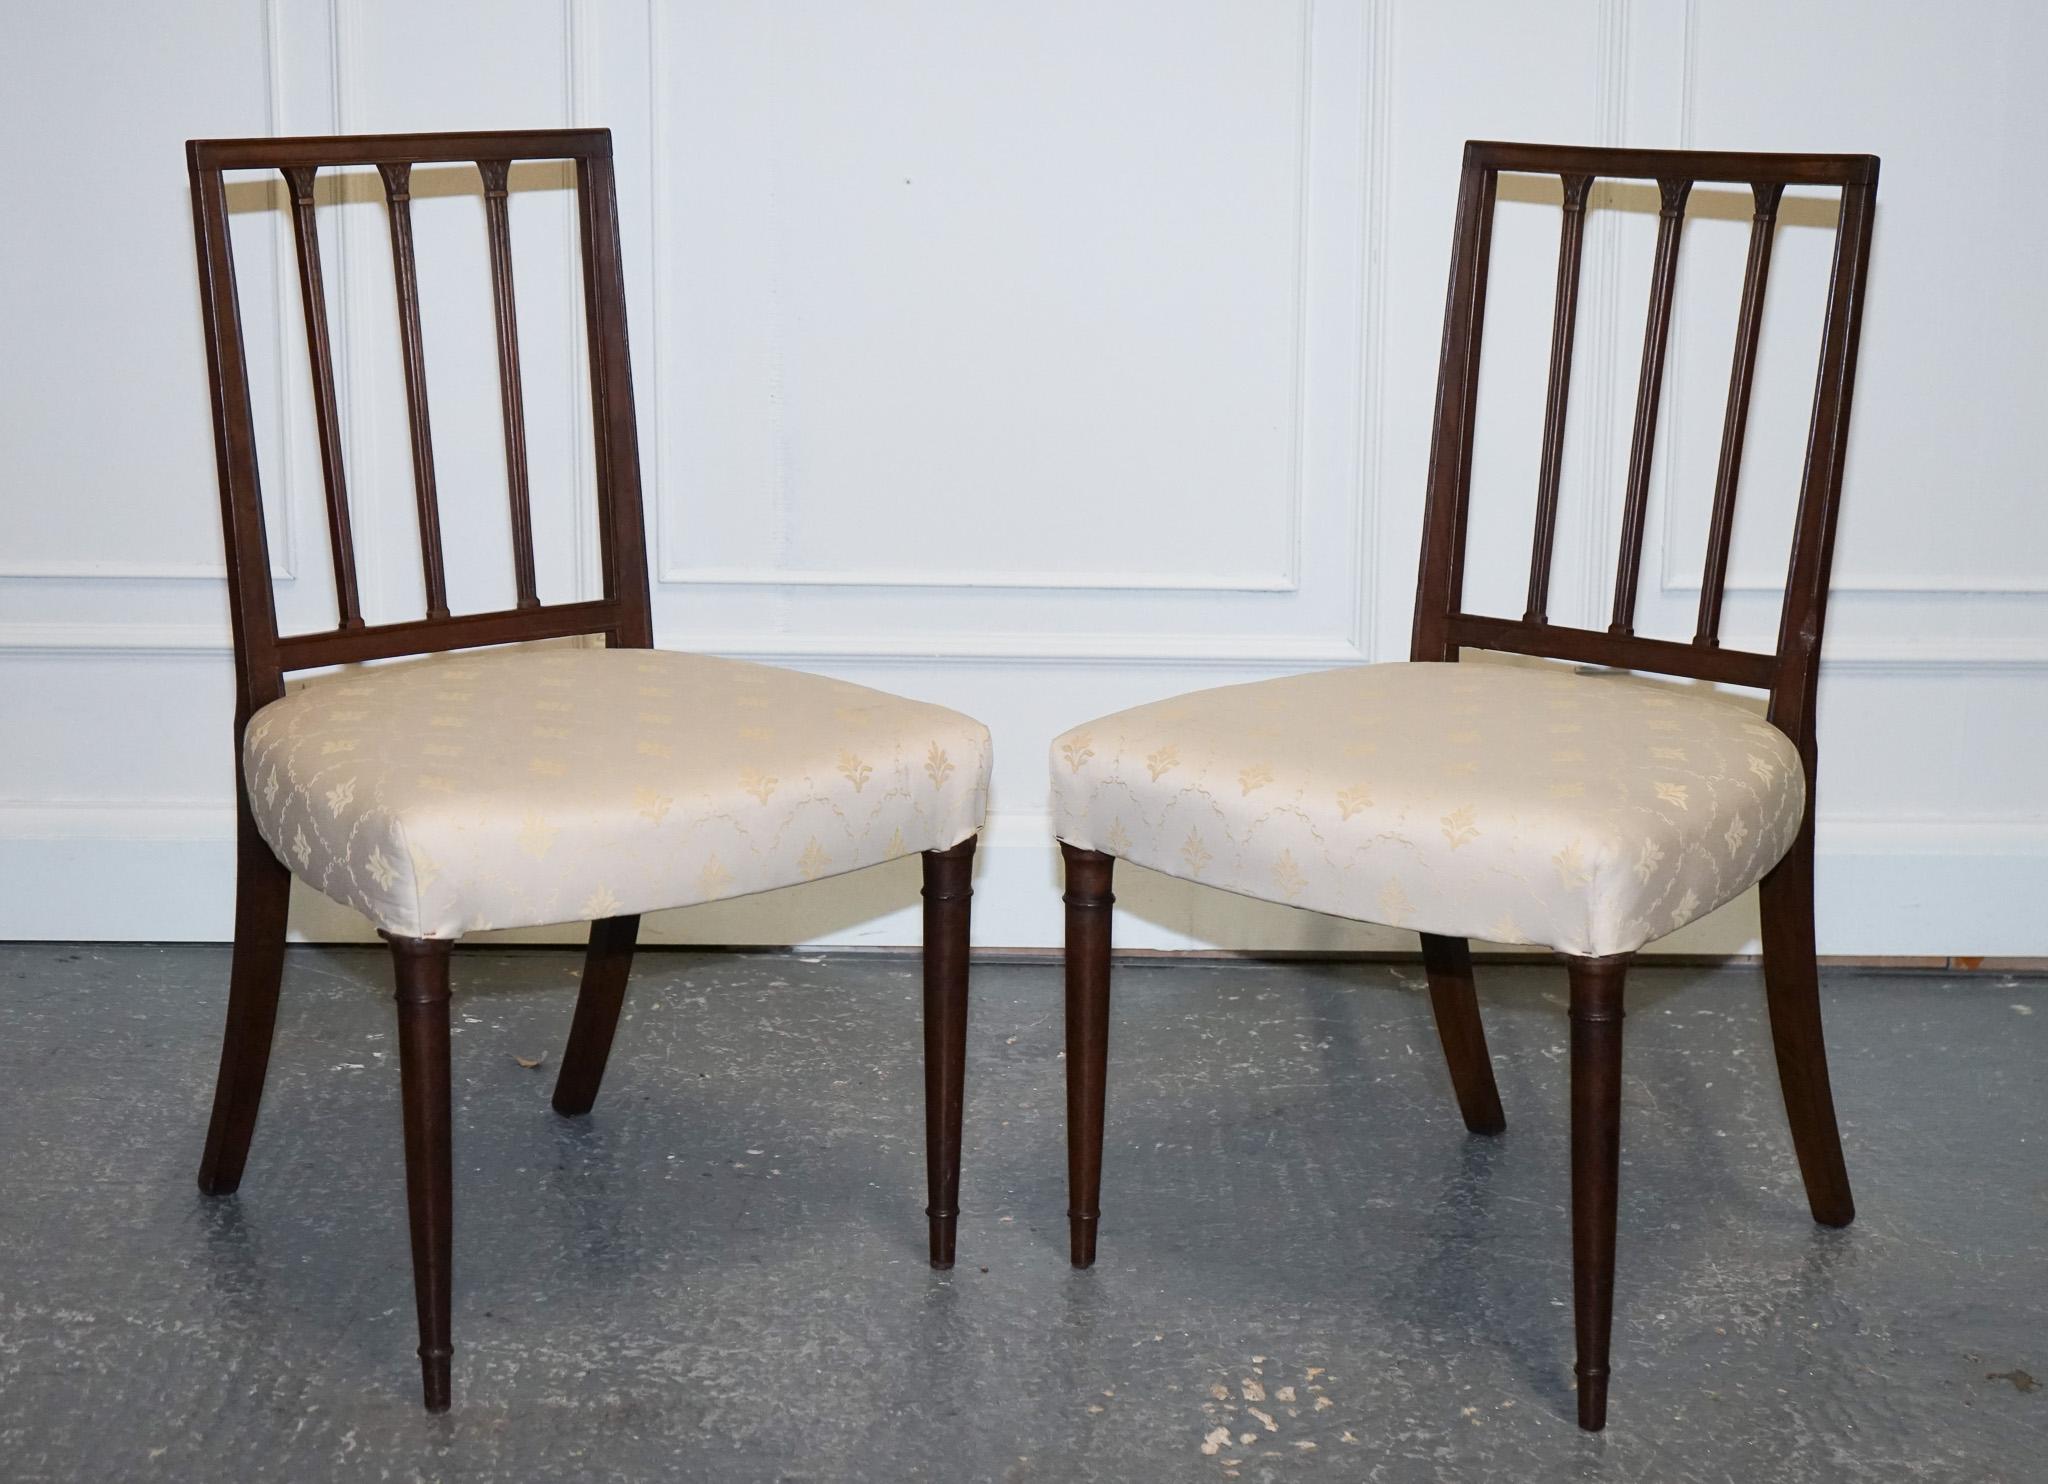 VICTORIAN PAiR OF SIDE CHAIRS WITH CREAM FABRIC SEATS In Good Condition For Sale In Pulborough, GB